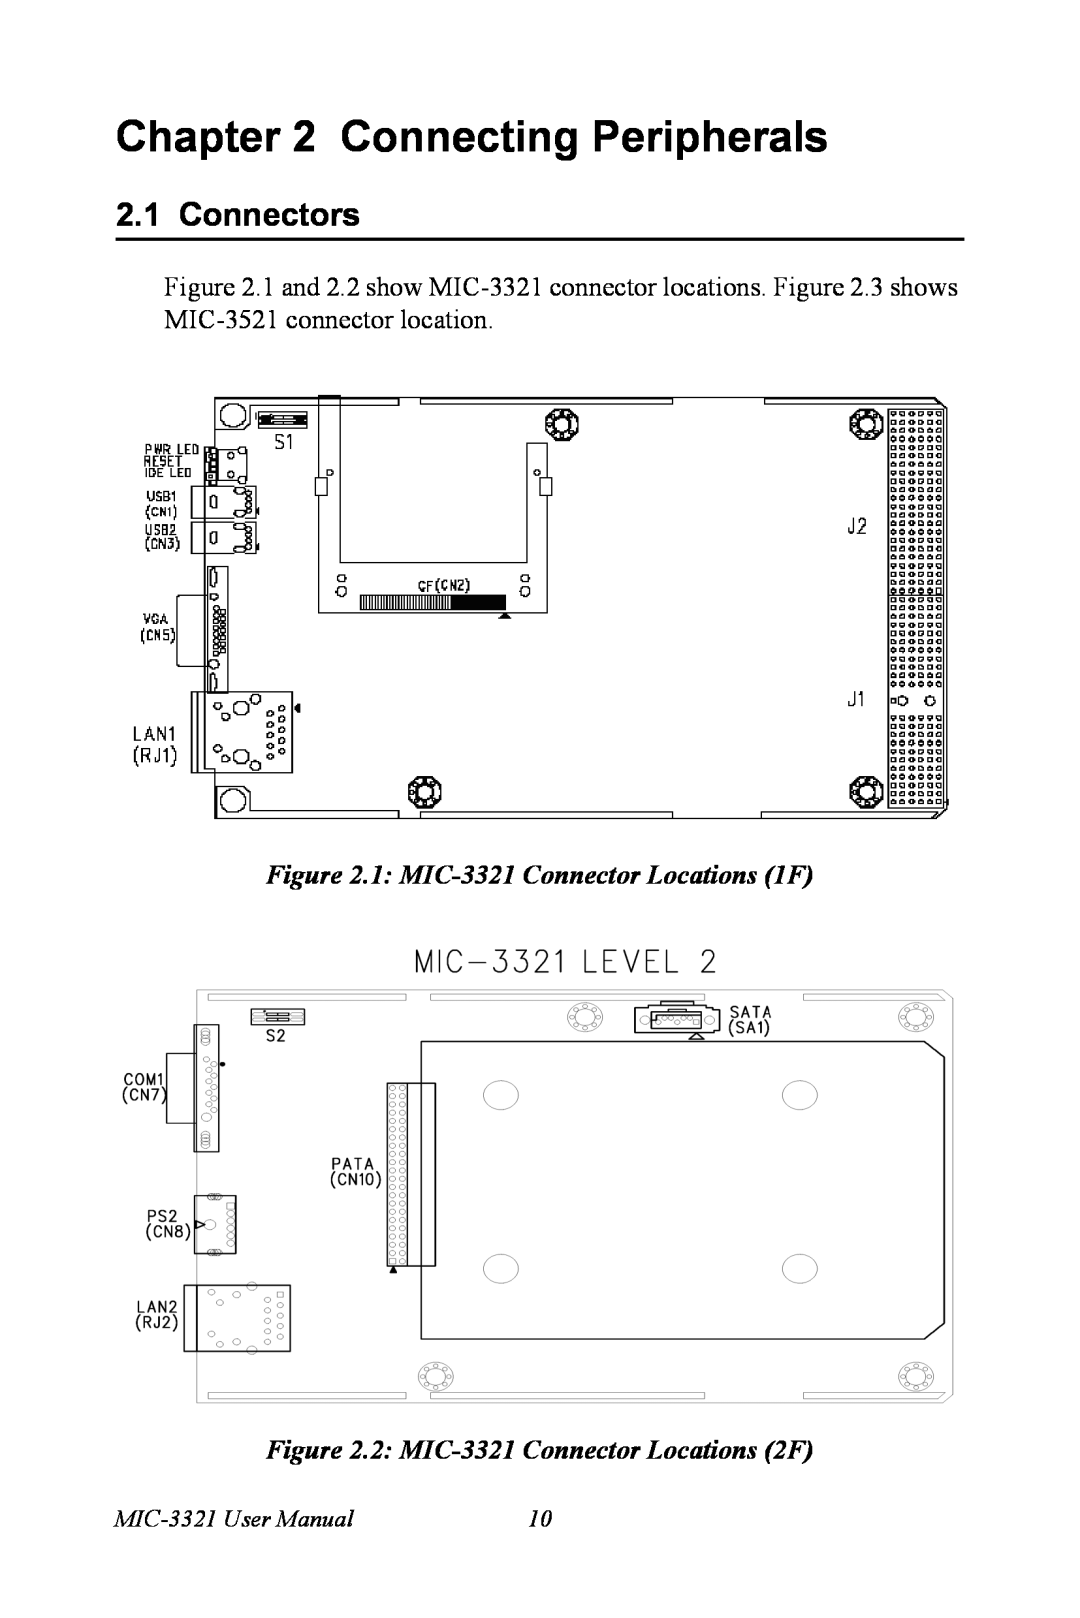 Intel Connecting Peripherals, Connectors, 1: MIC-3321Connector Locations 1F, 2: MIC-3321Connector Locations 2F 